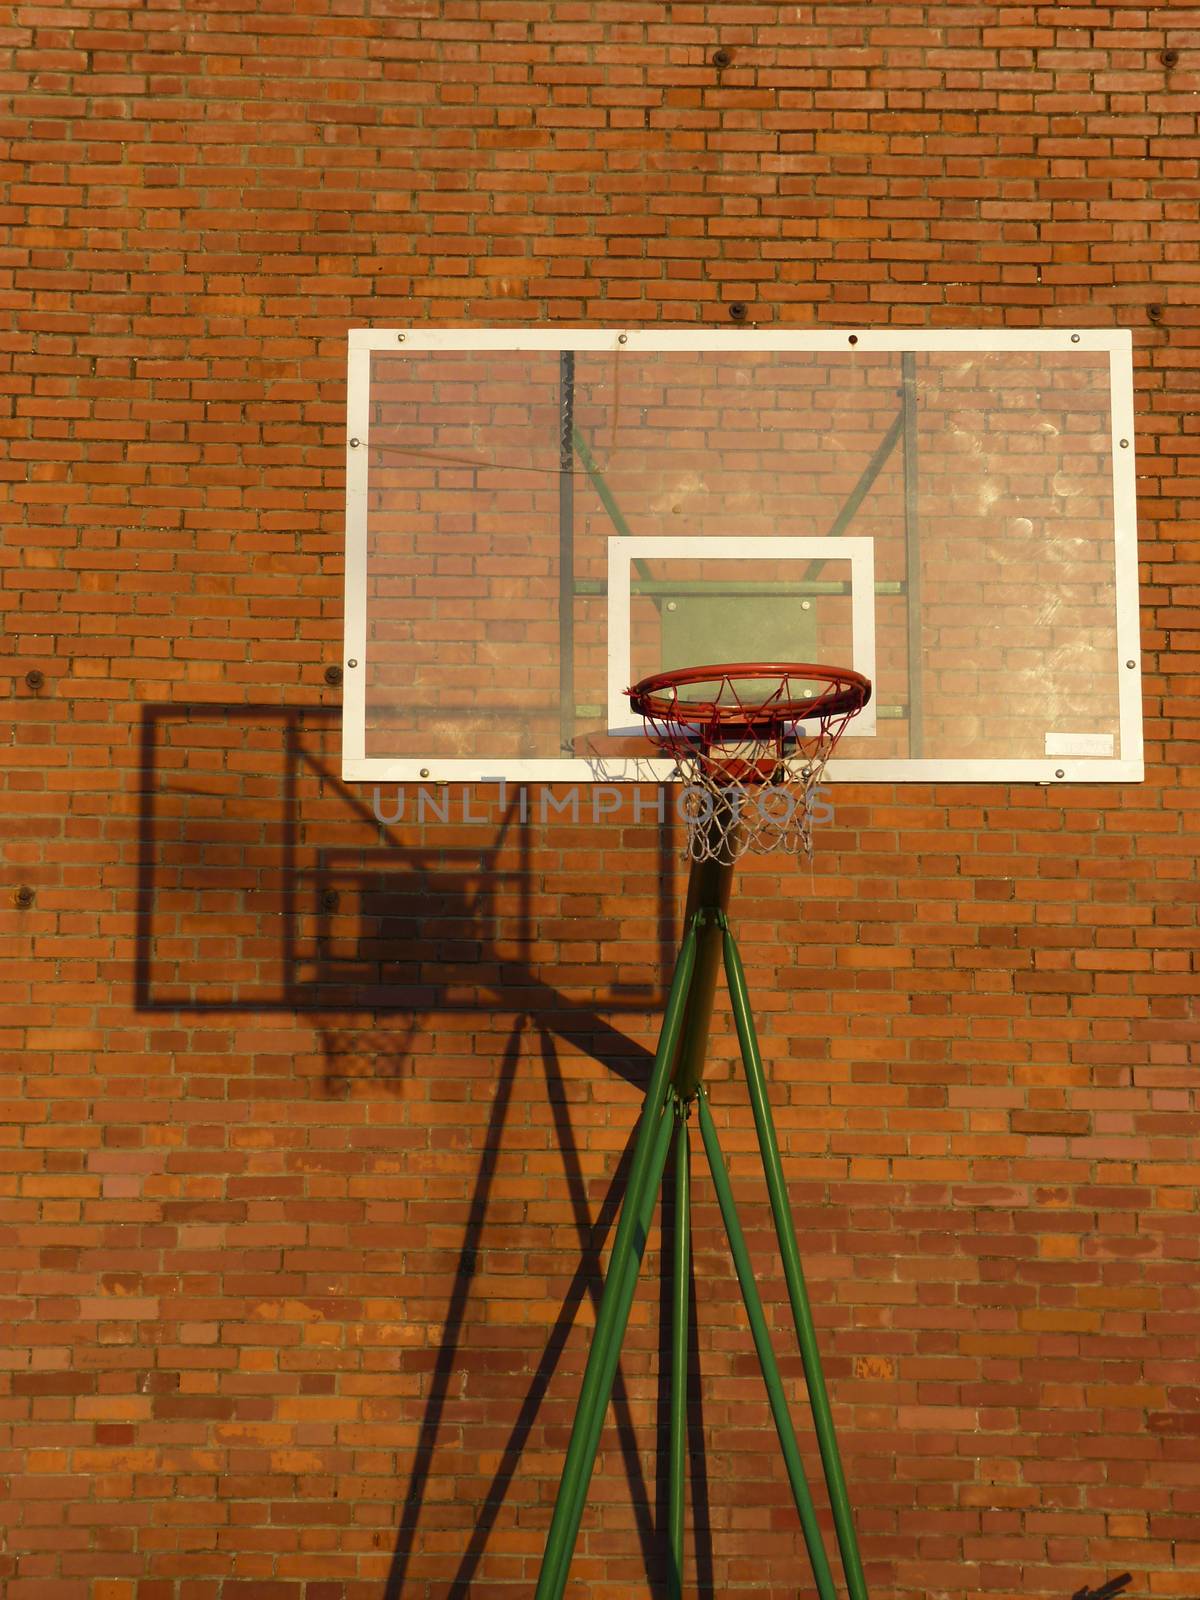 Basketball backboard and net with his shadow on the red wall of bricks